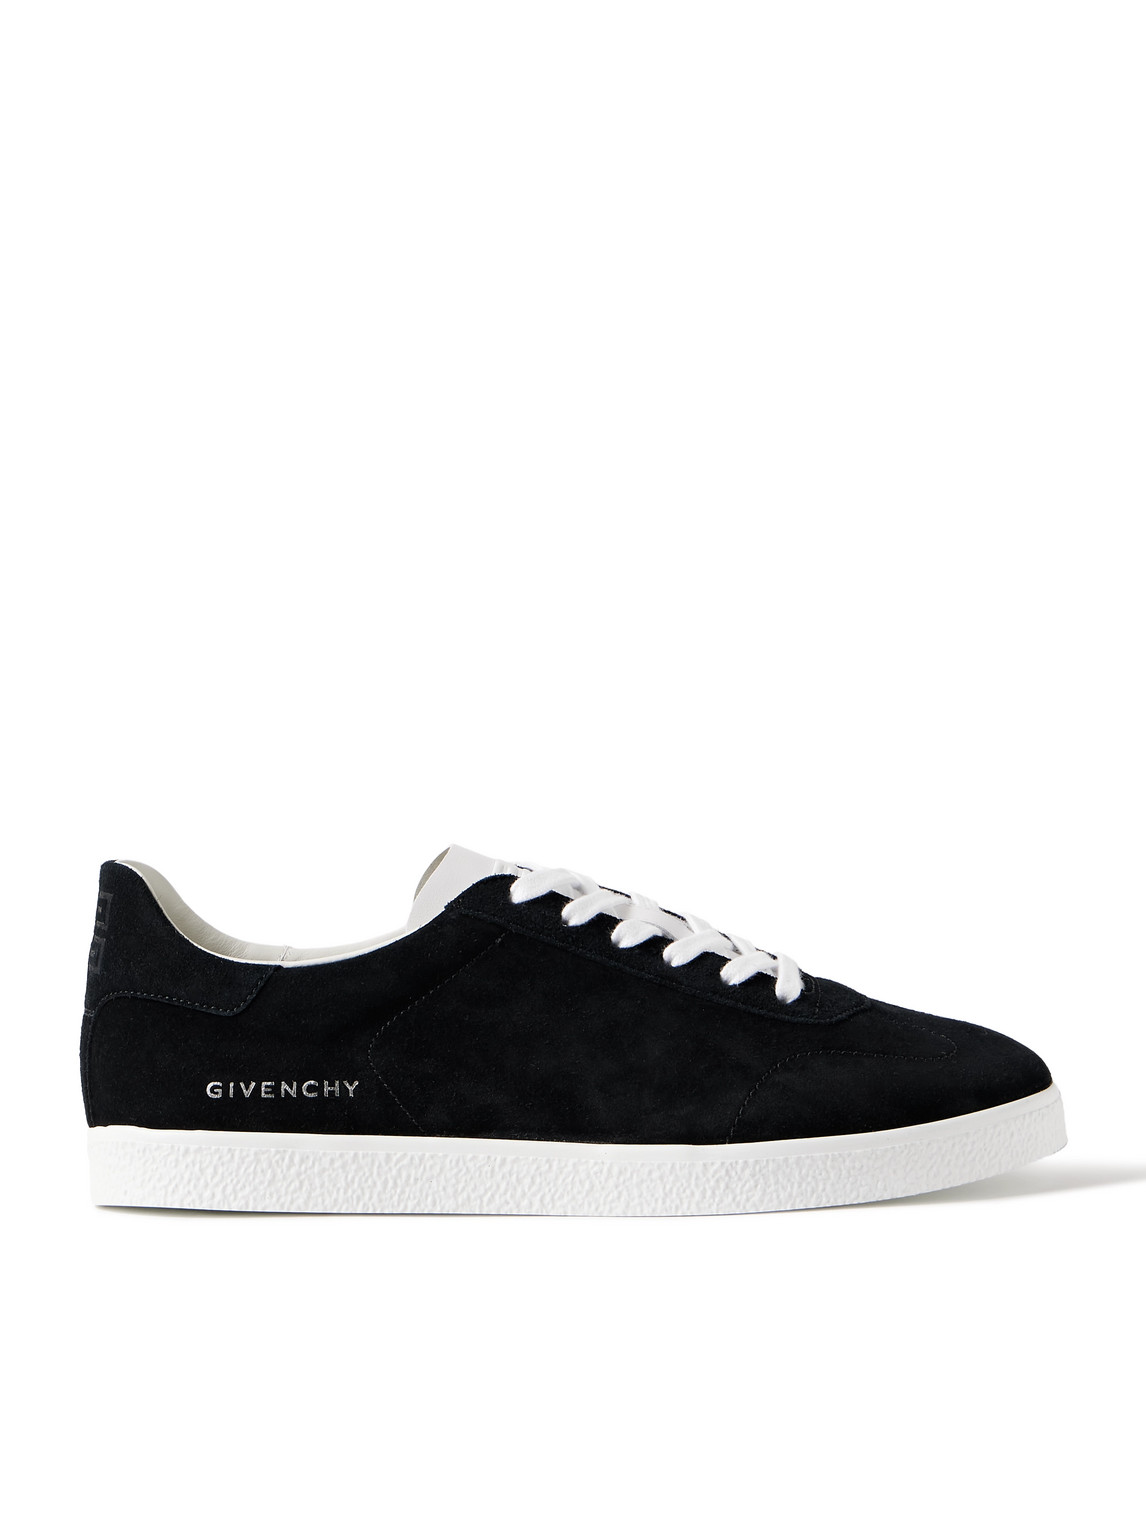 GIVENCHY TOWN SUEDE AND LEATHER SNEAKERS